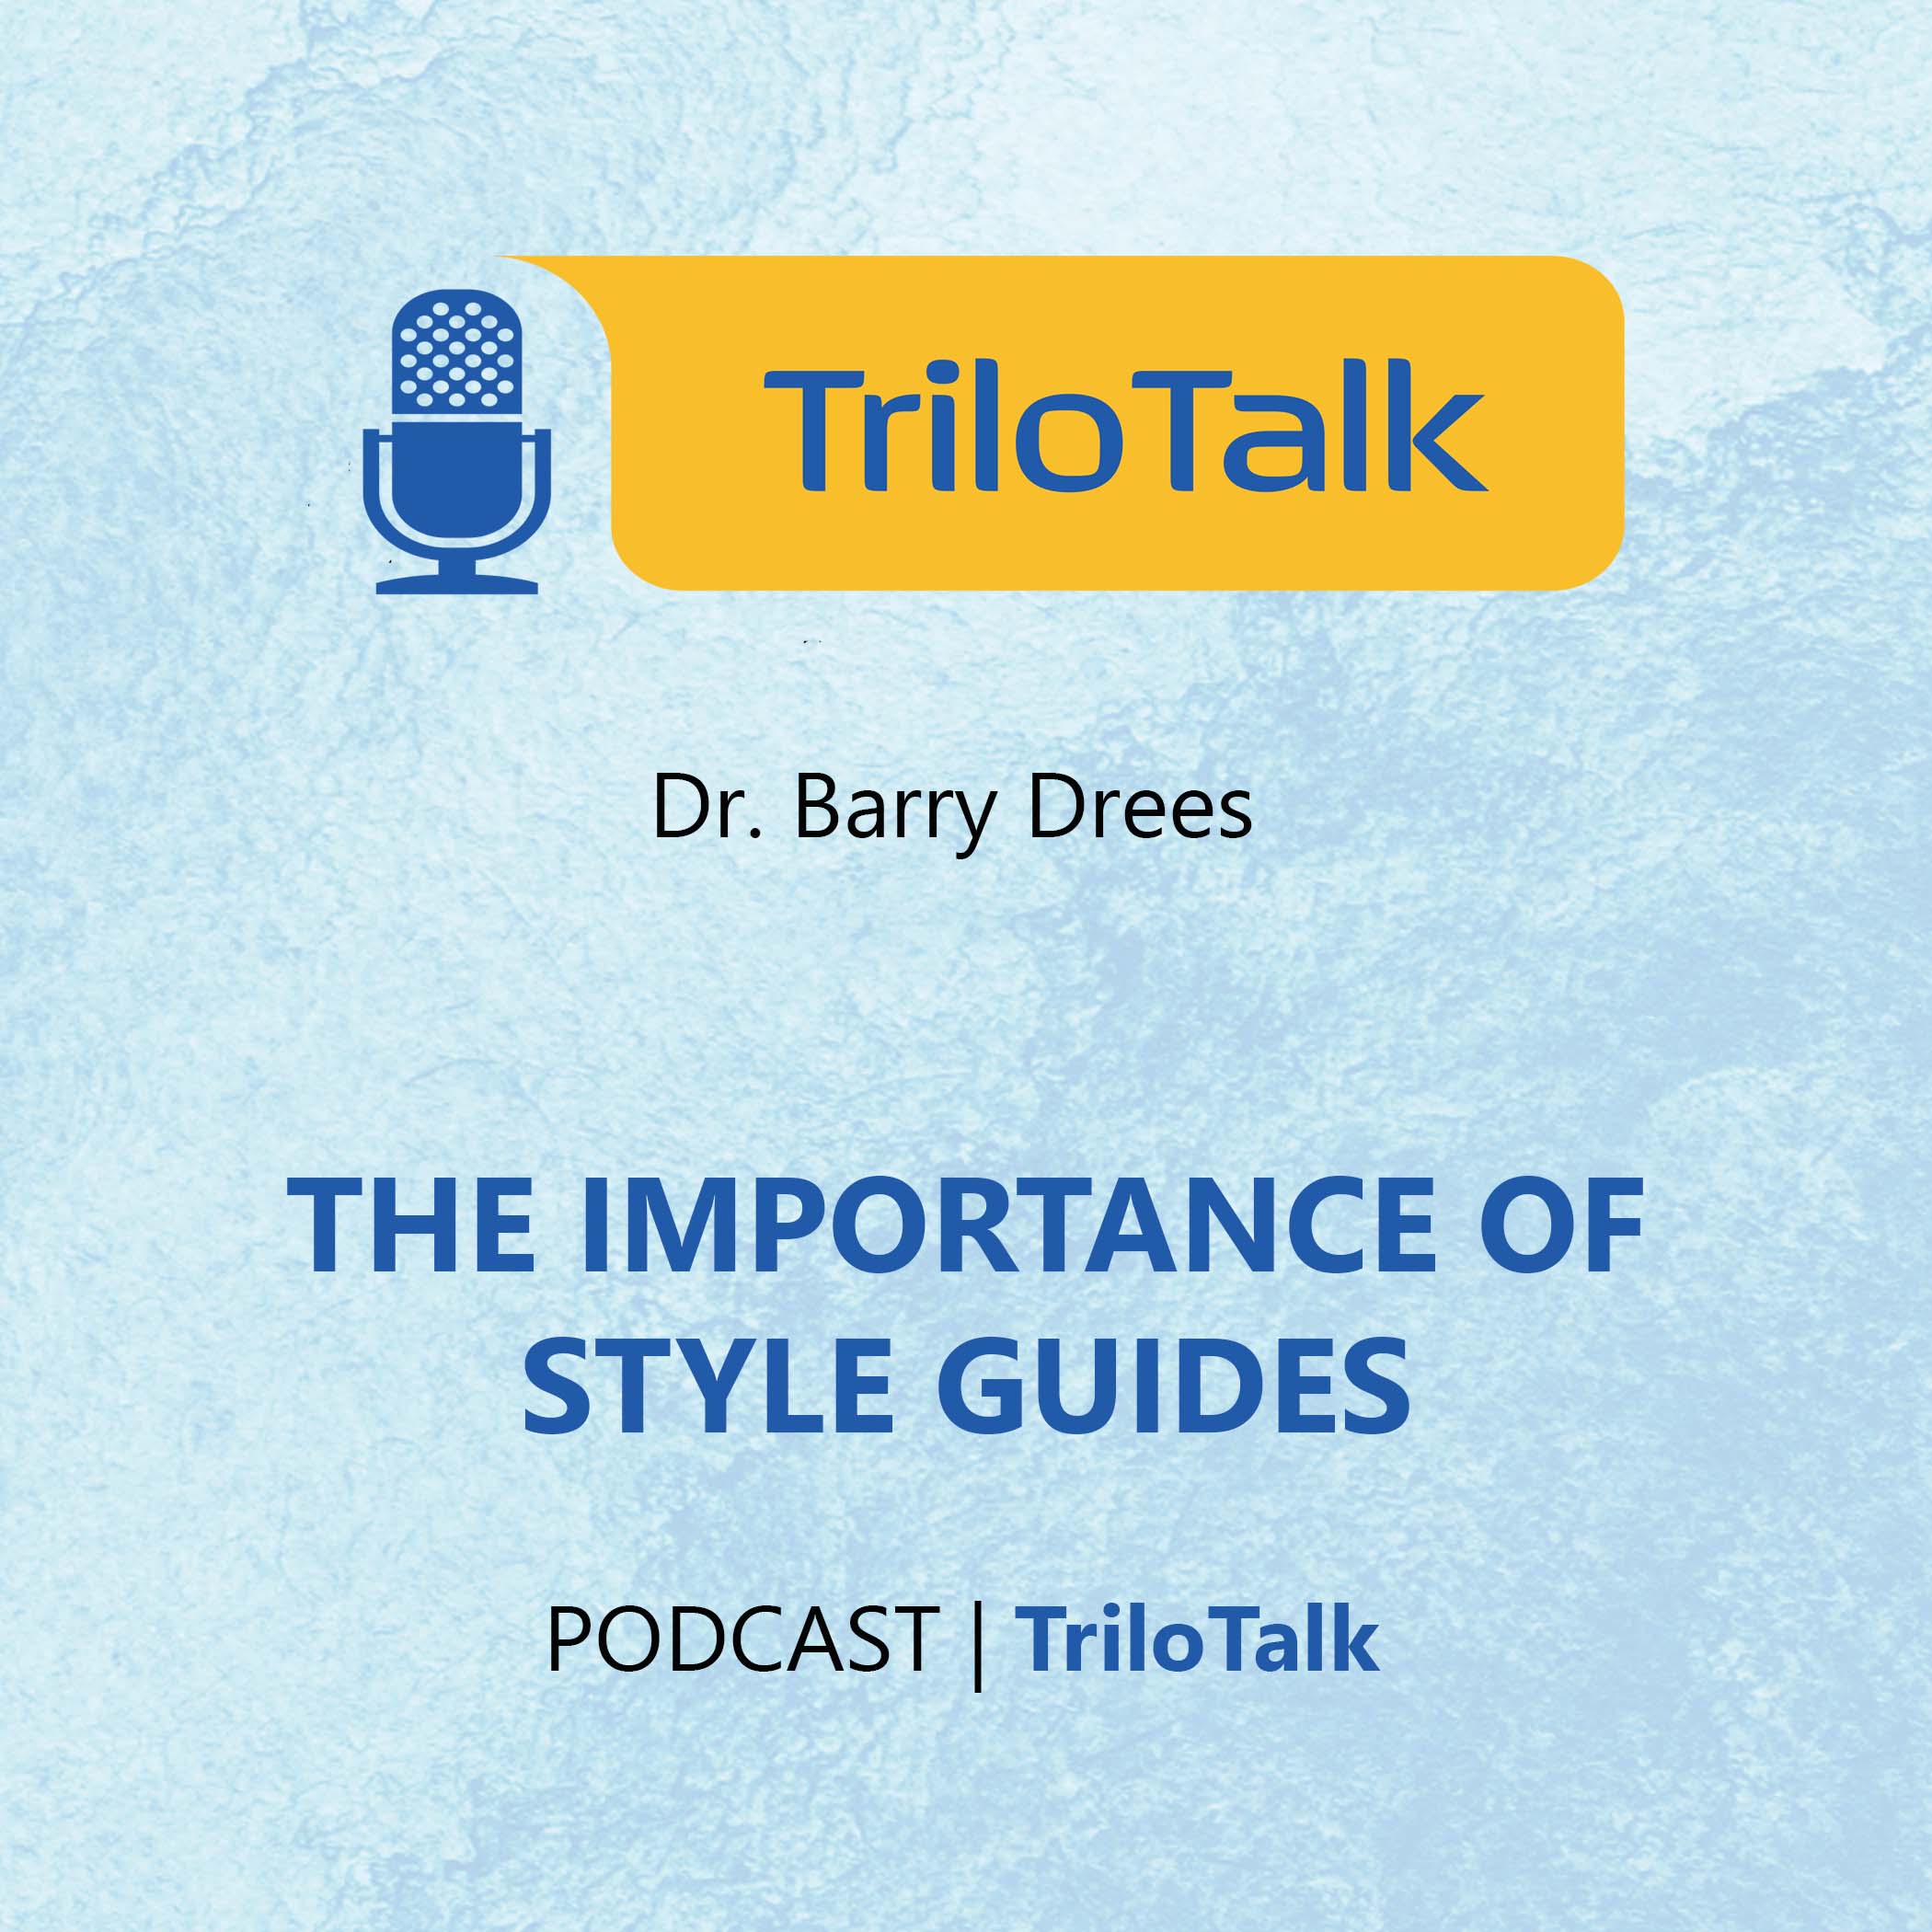 The Importance of Style Guides